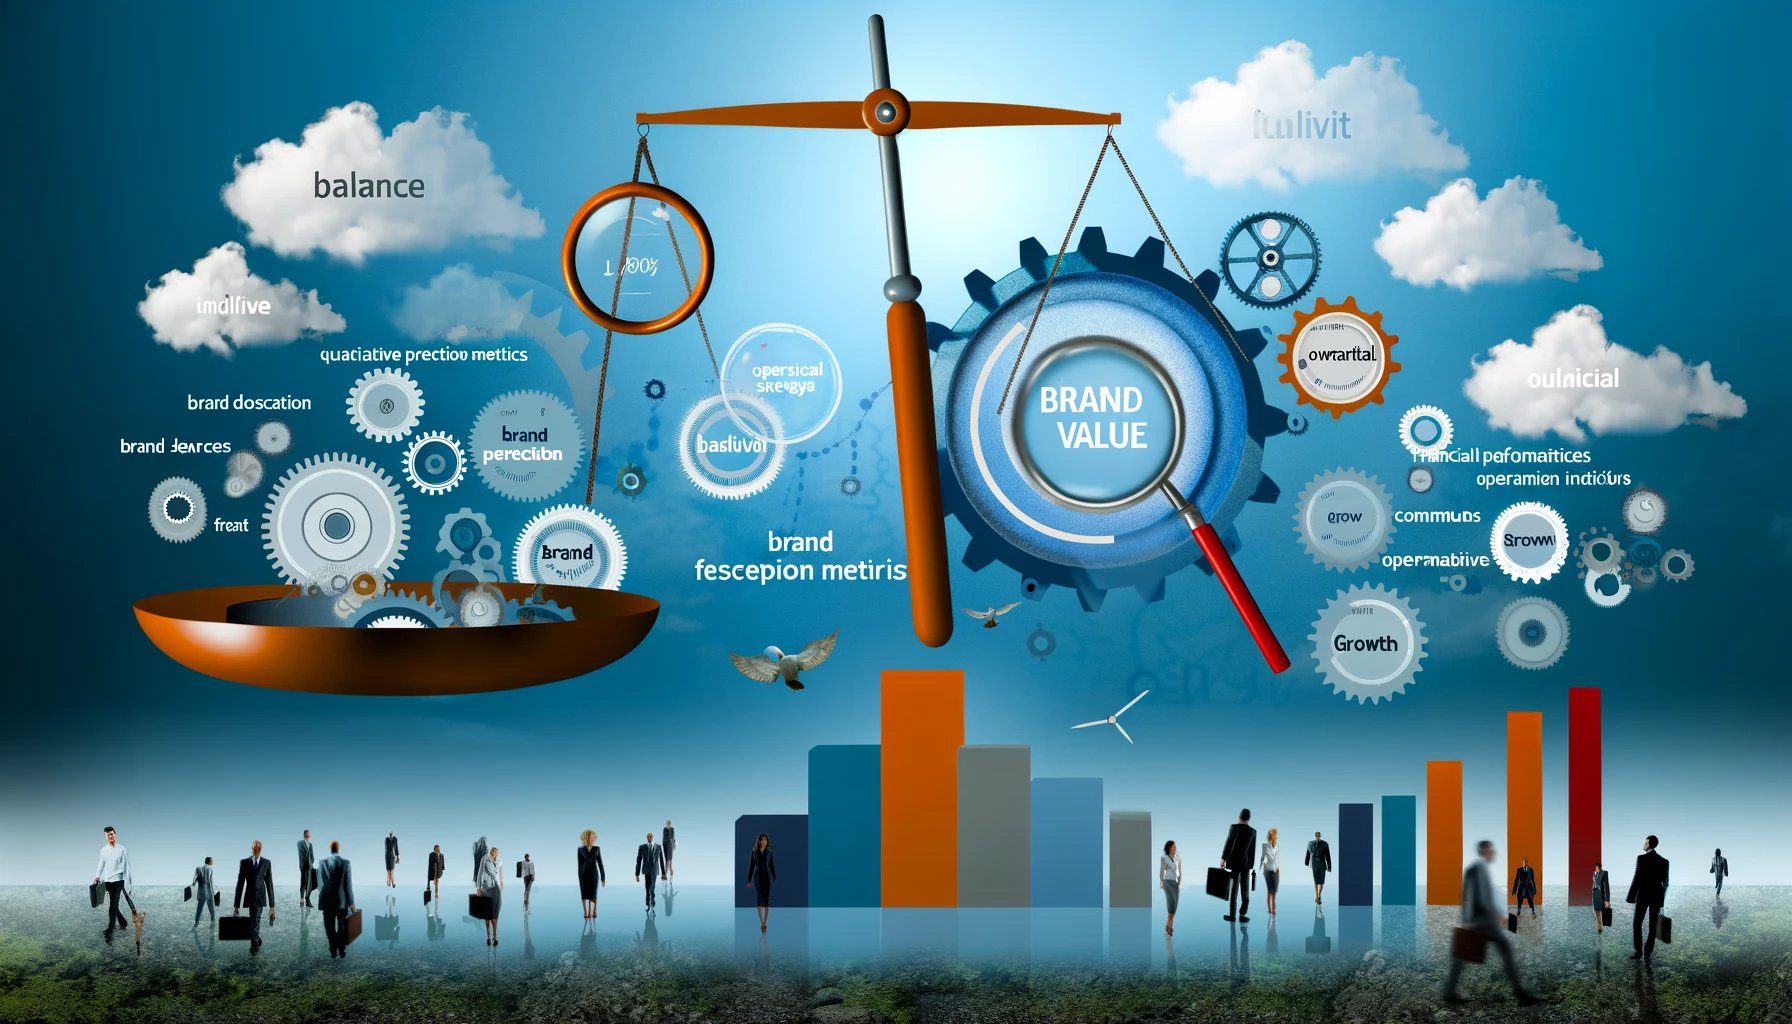 An abstract depiction of the essential brand value metrics for business success, featuring scales, a magnifying glass, interconnected gears, rising graphs, and a diverse group of people, symbolizing the balance, insight, synergy, growth, and customer loyalty needed for enhancing brand value.